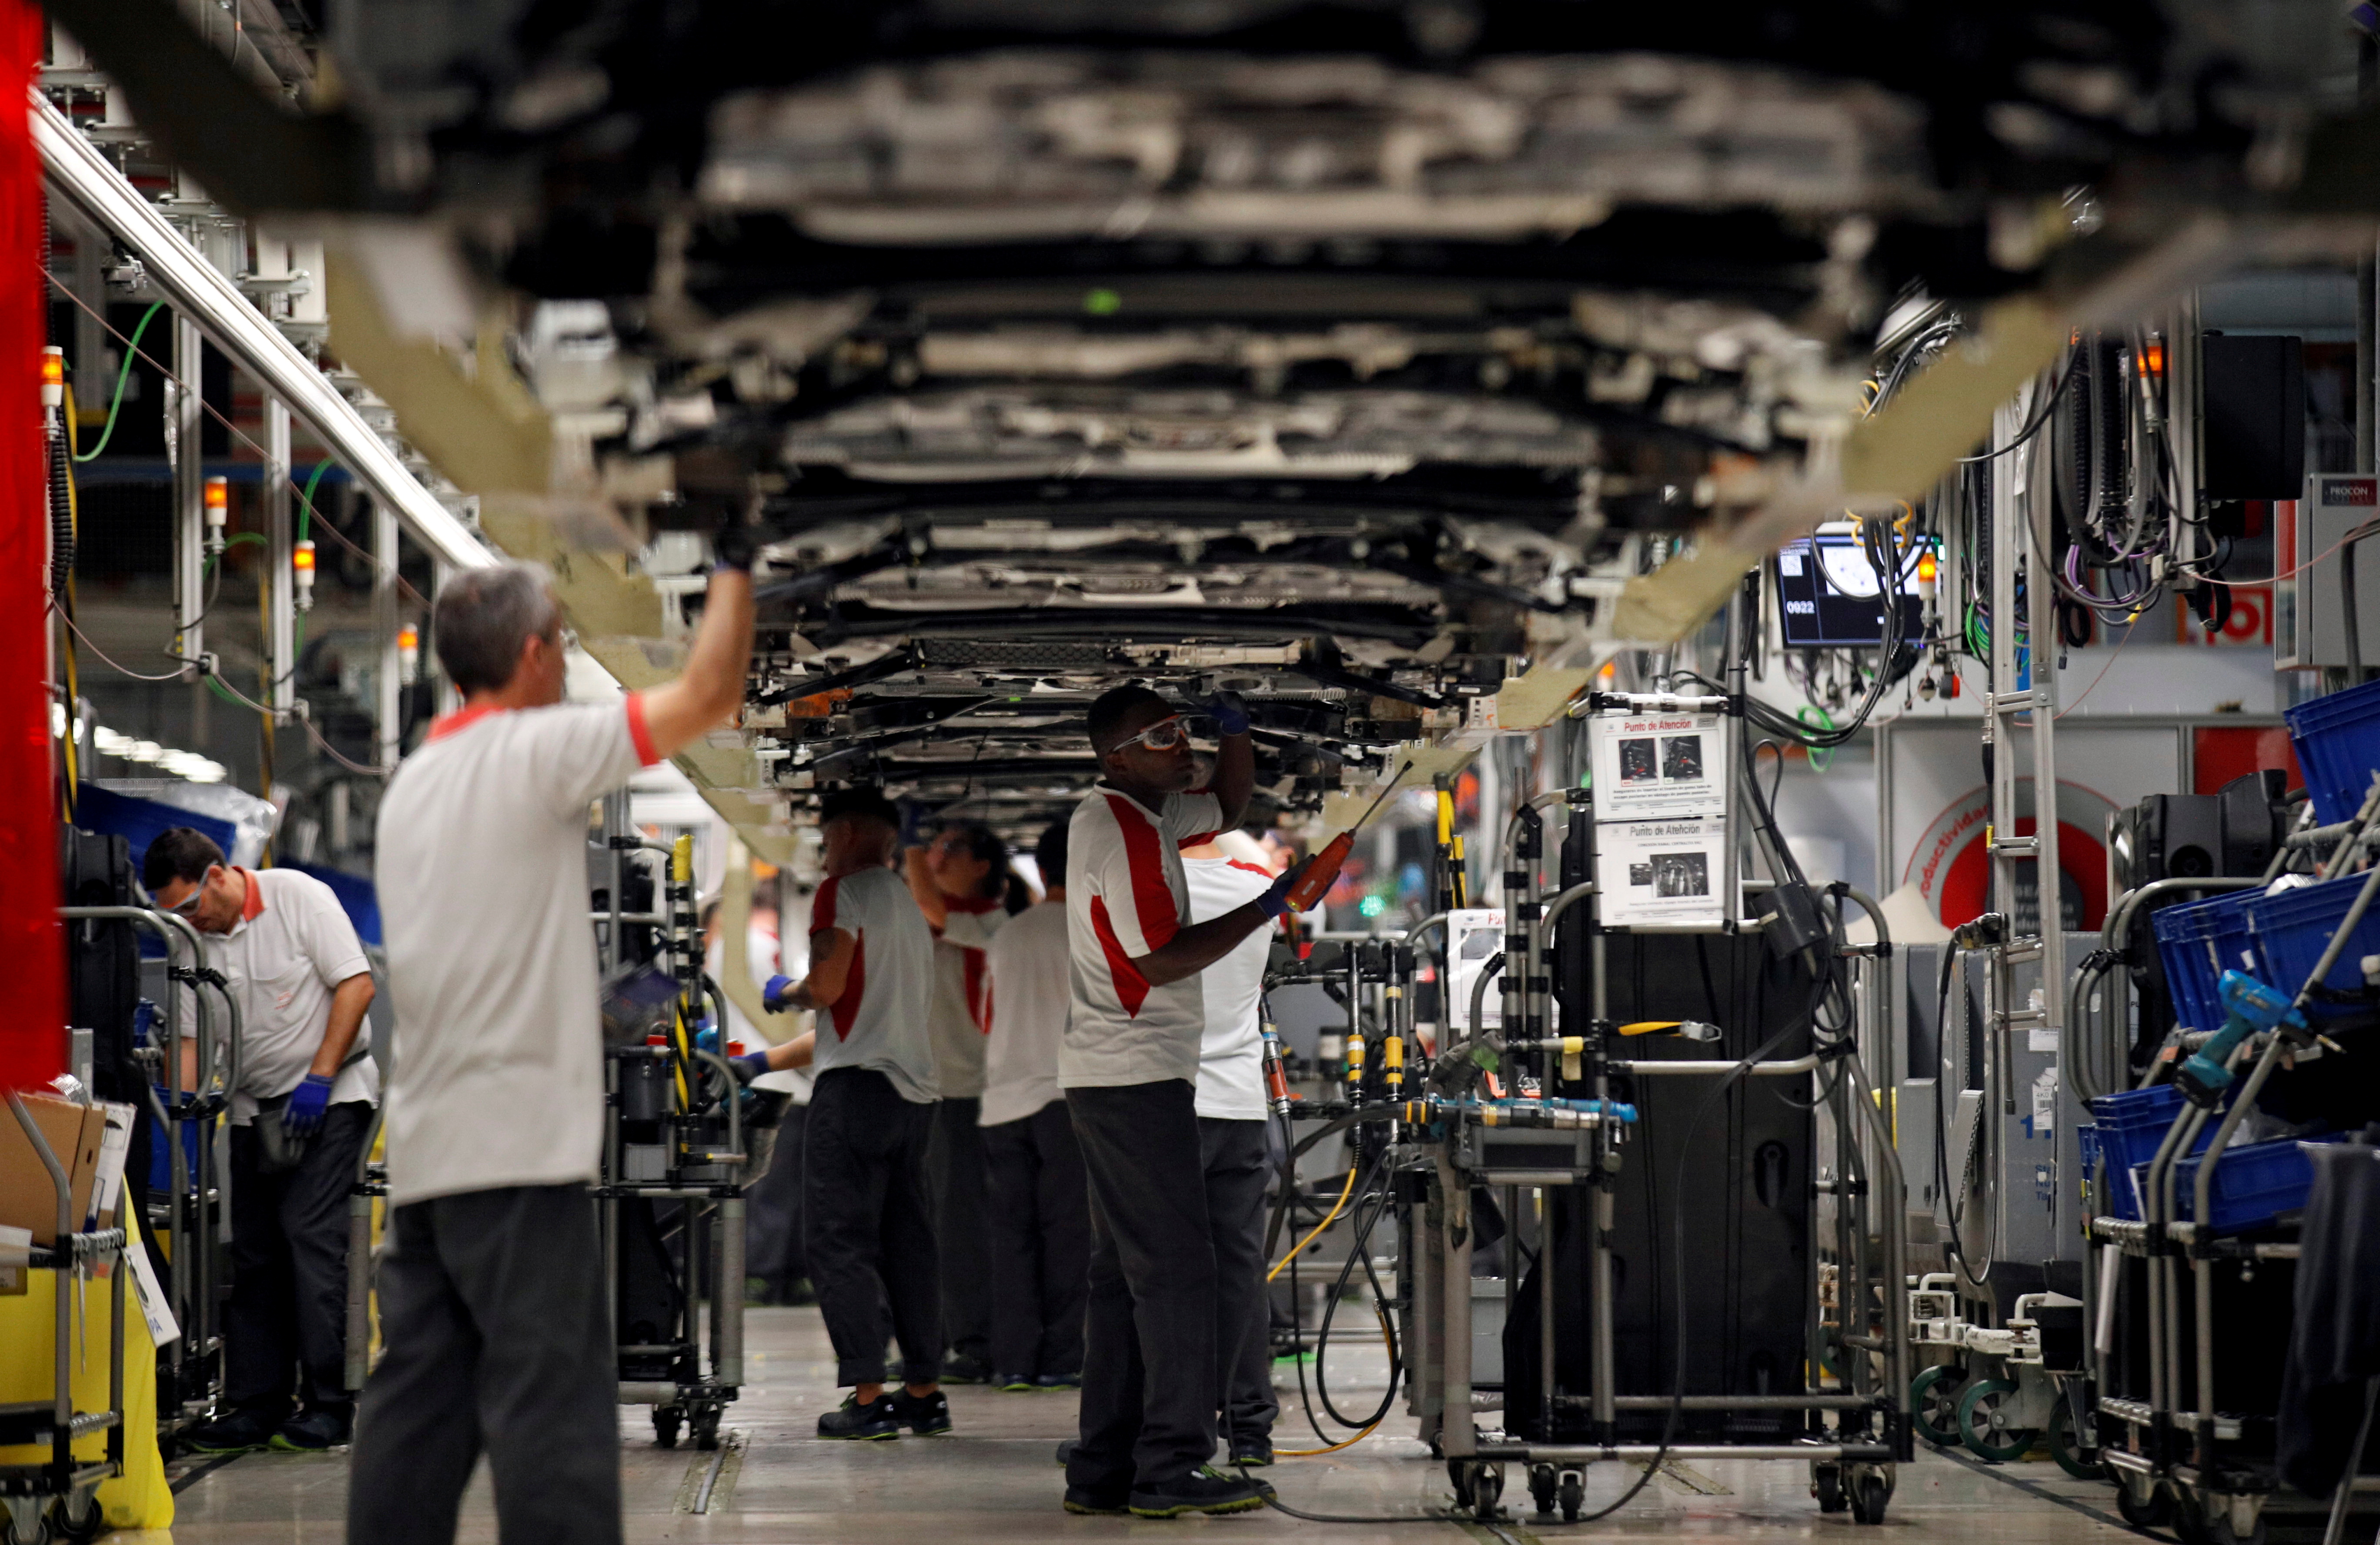 Workers assemble vehicles on the assembly line of the SEAT car factory in Martorell